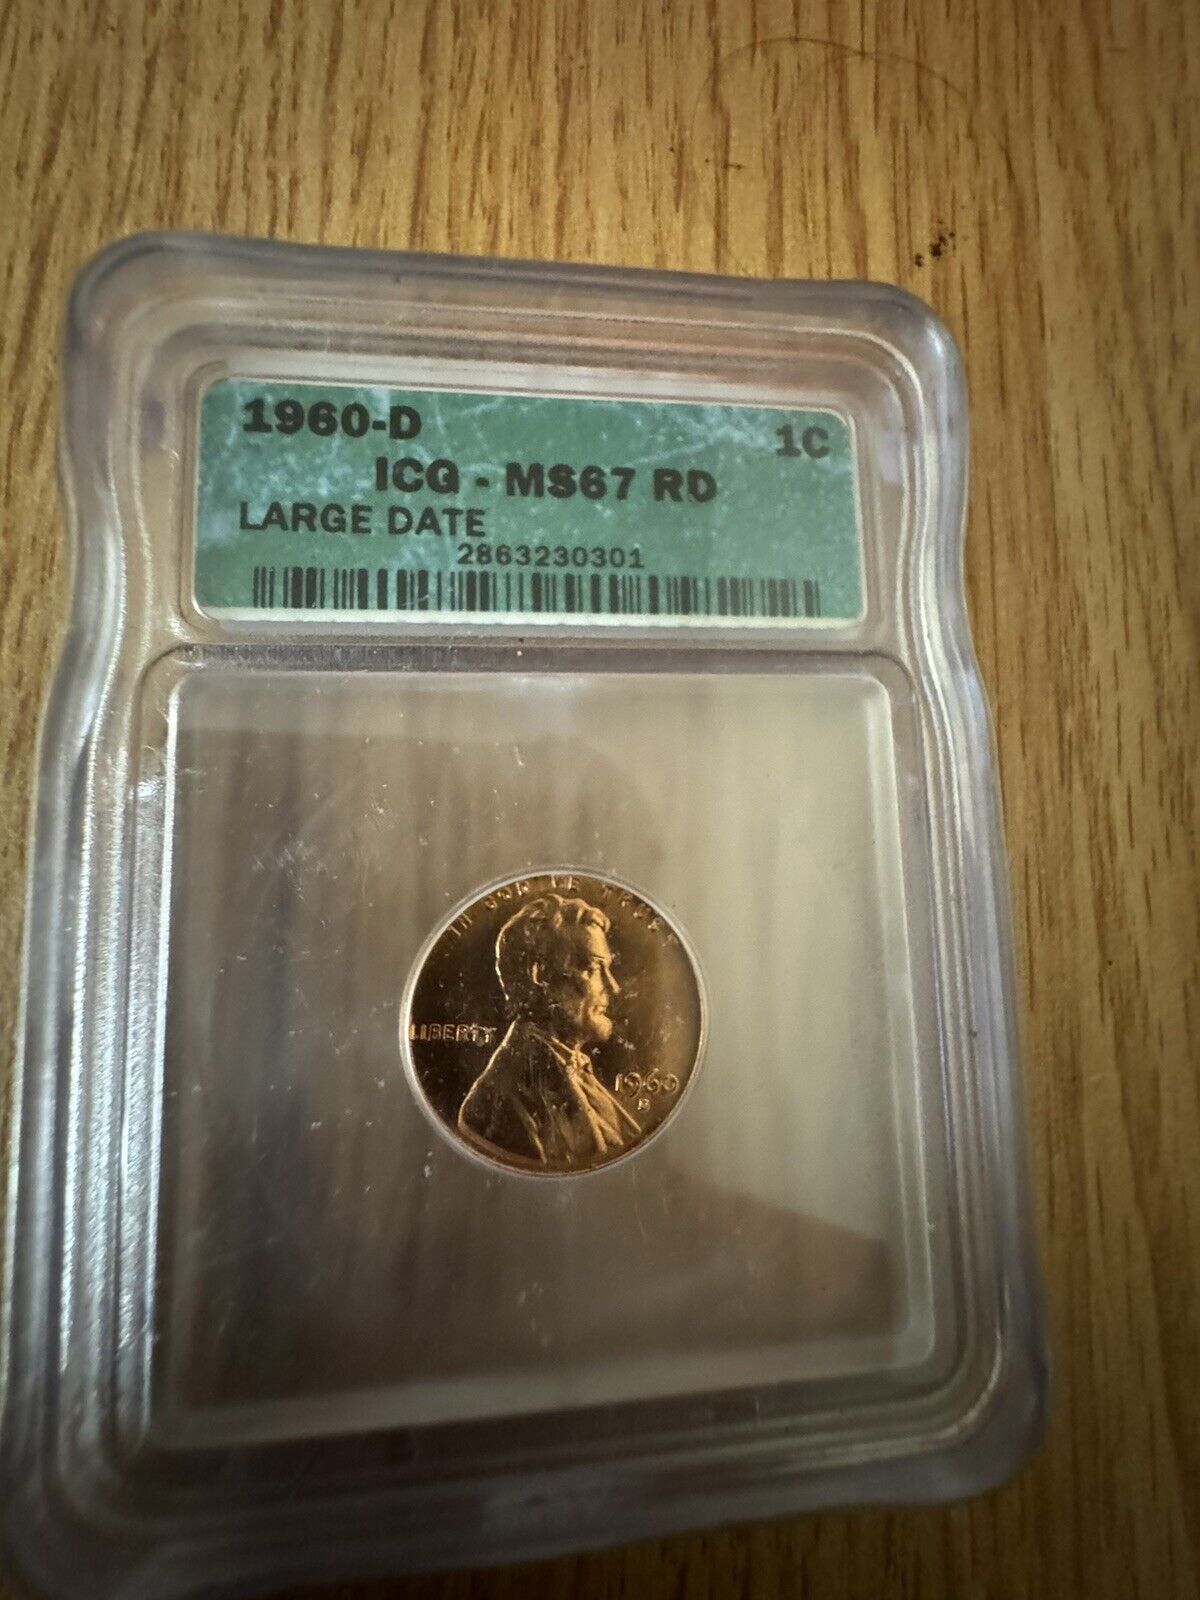 1960-D Large Date MS67 RD 1c Penny *Rare*